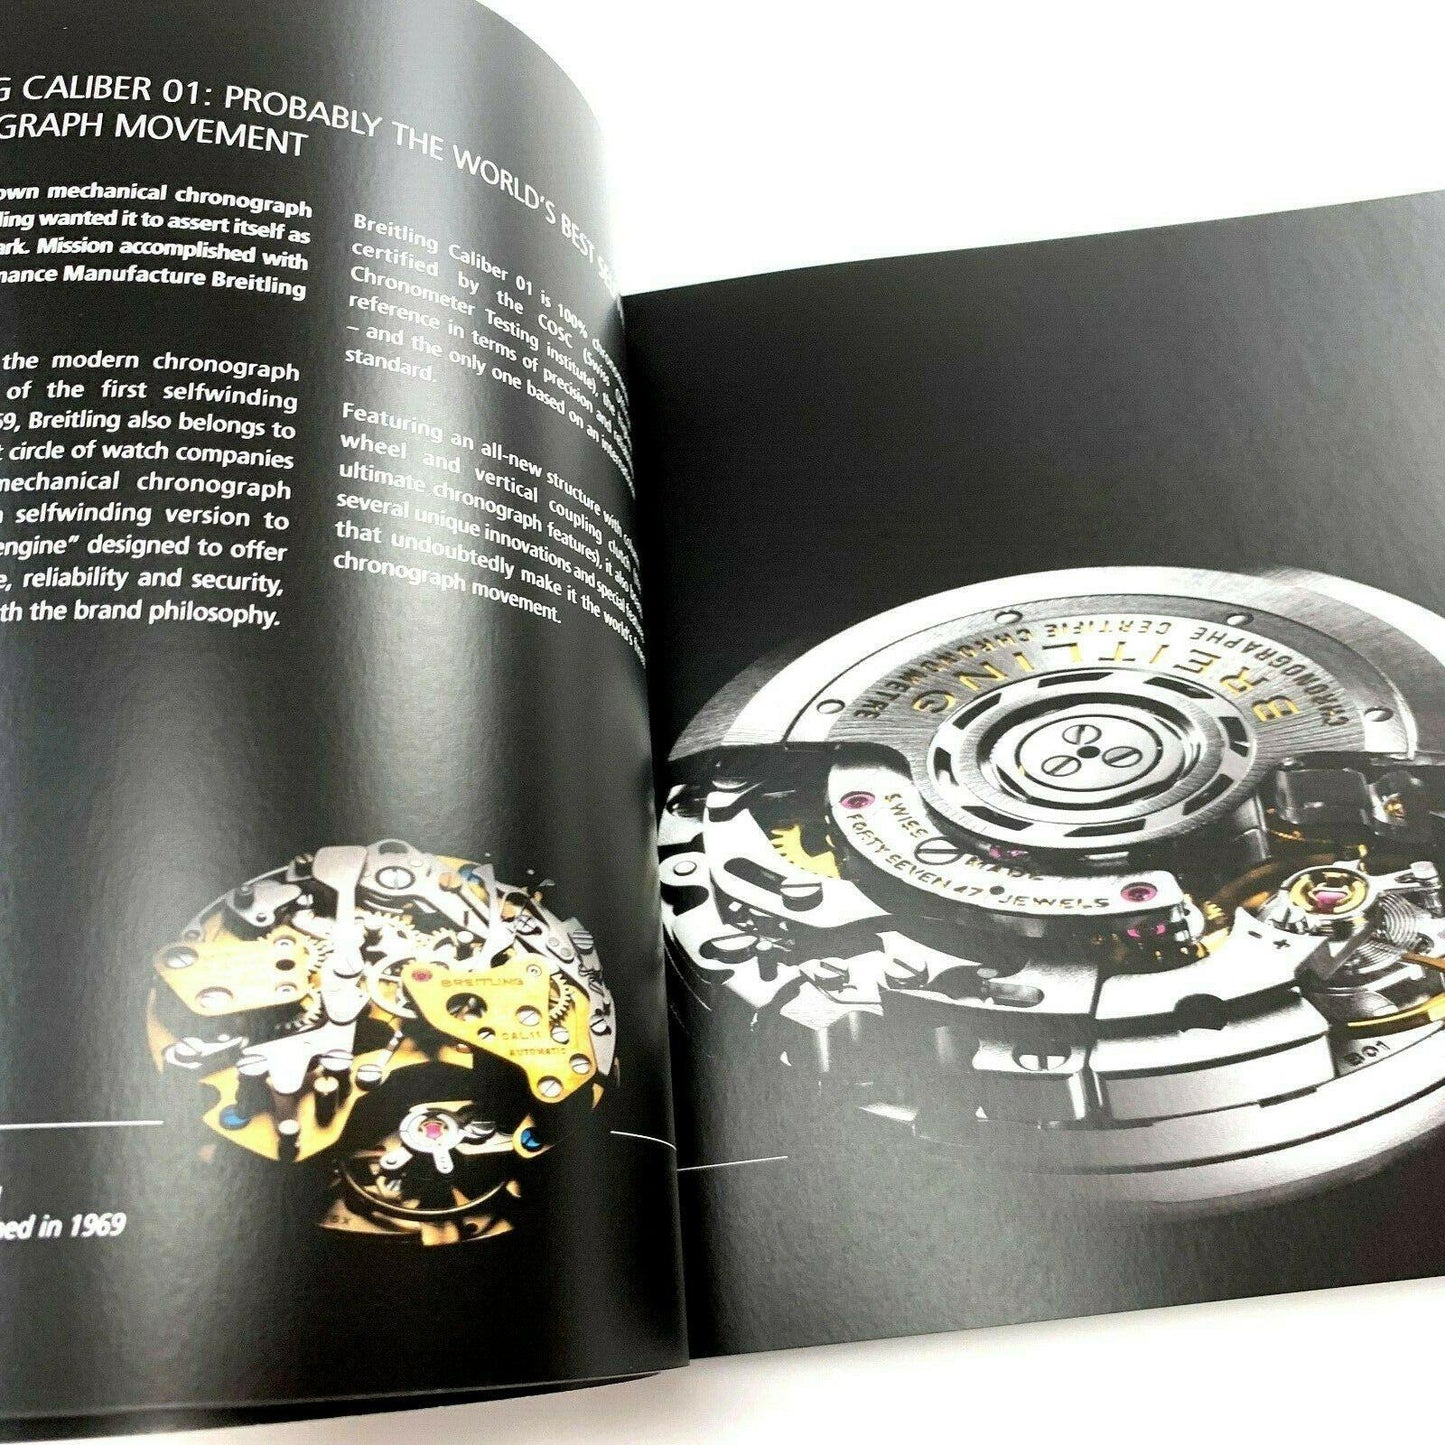 Breitling Coffee Table Catalog Book Collection for Luxury Watches & Jewelry - Genuine Design Luxury Consignment